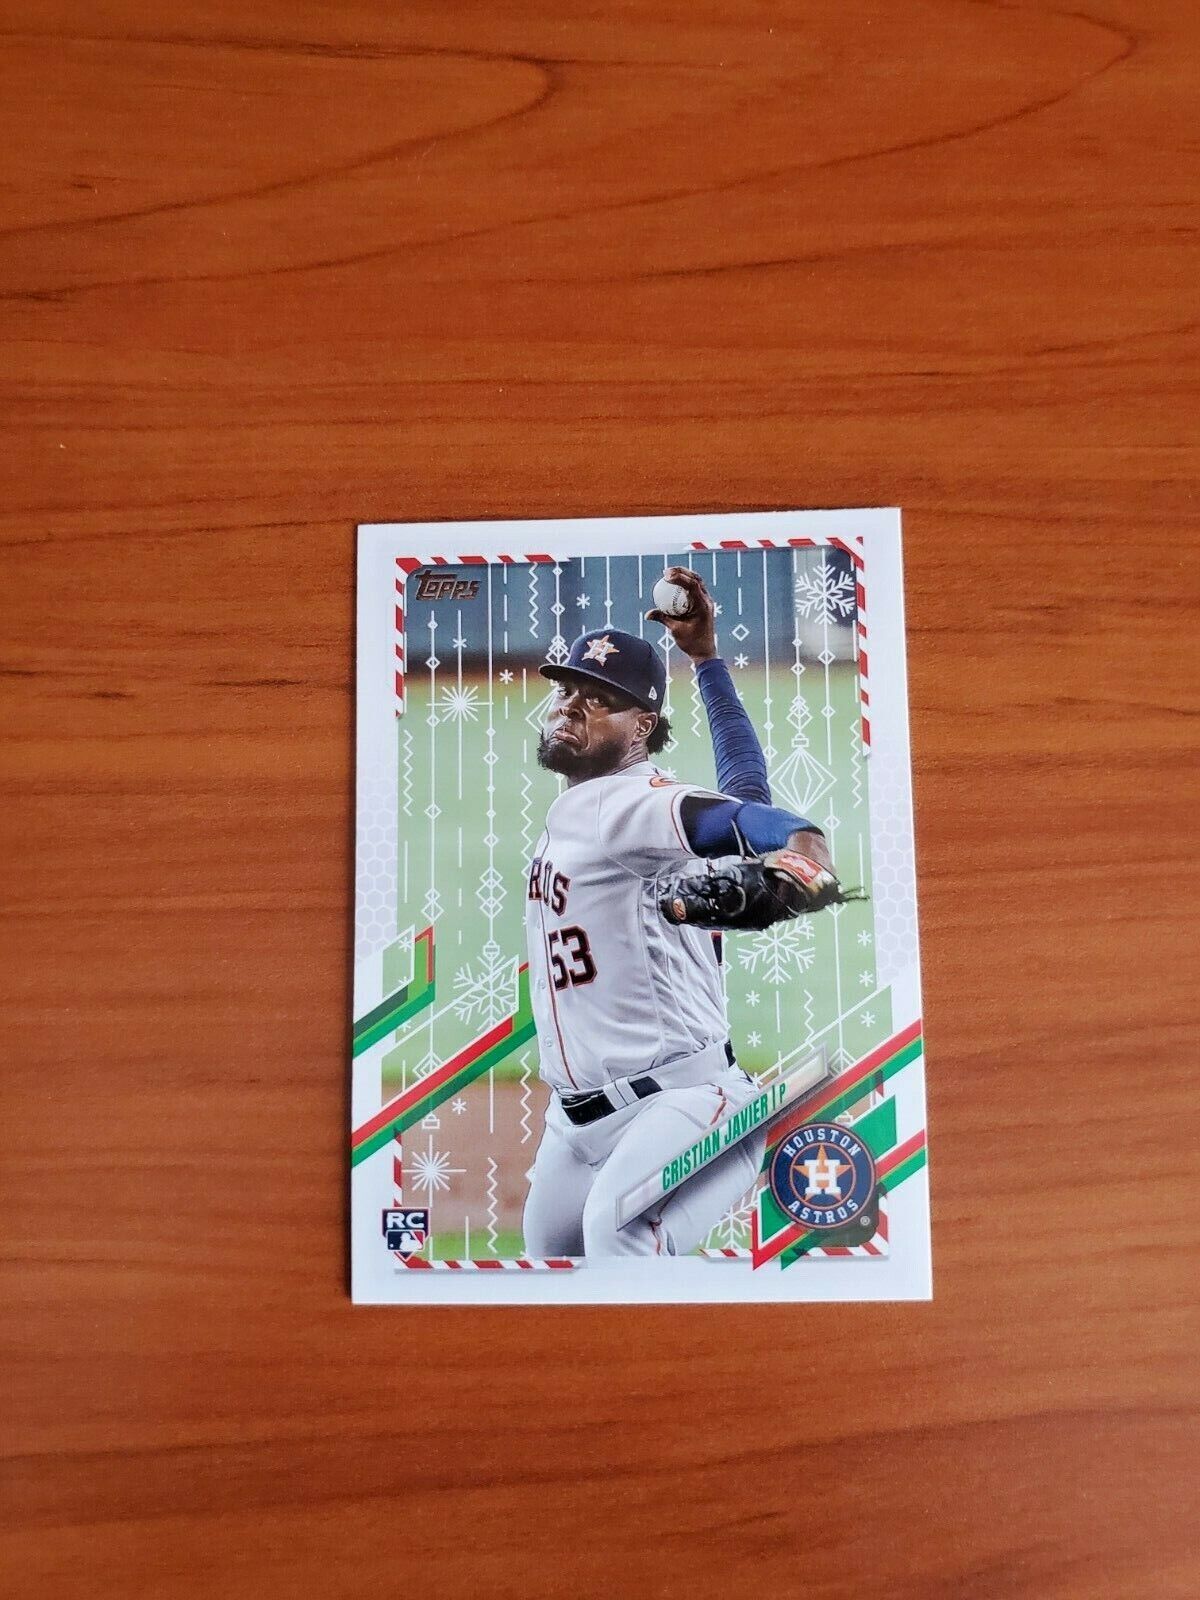 Cristian Javier - 2021 Topps Holiday Baseball Rookie Card RC - #HW74. rookie card picture